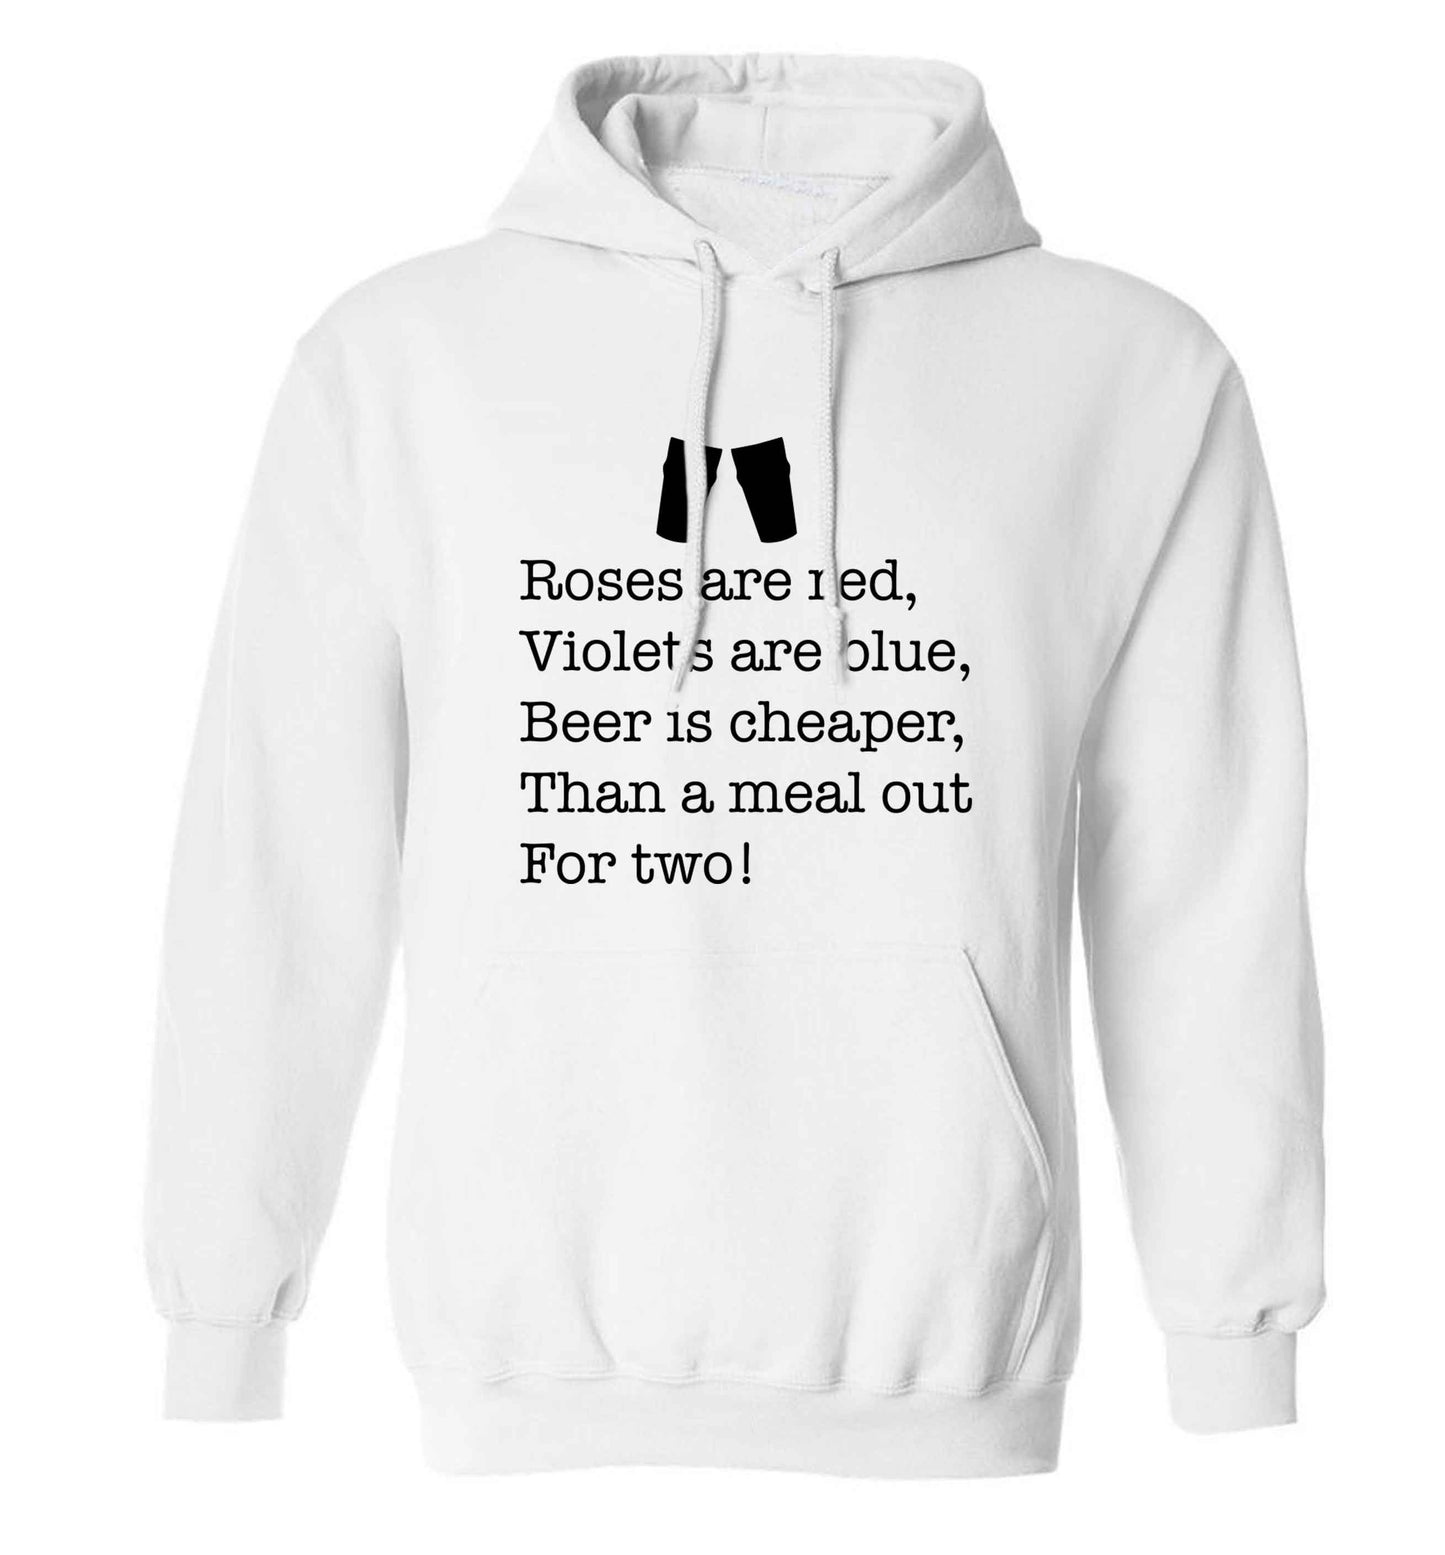 Roses are red violets are blue beer is cheaper than a meal out for two adults unisex white hoodie 2XL